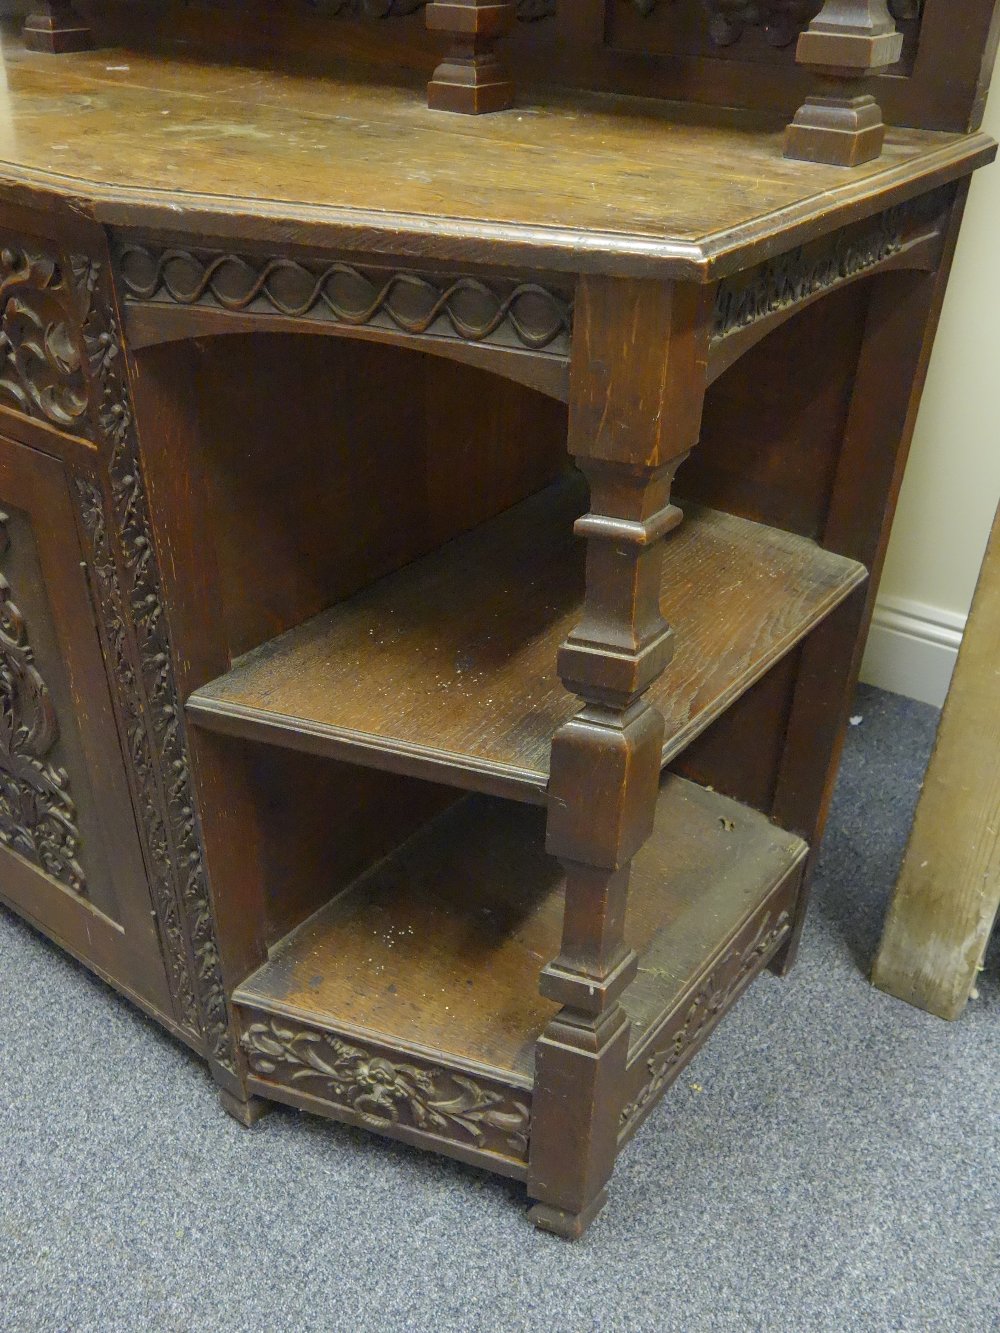 Delicate Arts & Crafts period profusely carved Chiffonier with a carved decorative back and 2 panels - Image 2 of 3